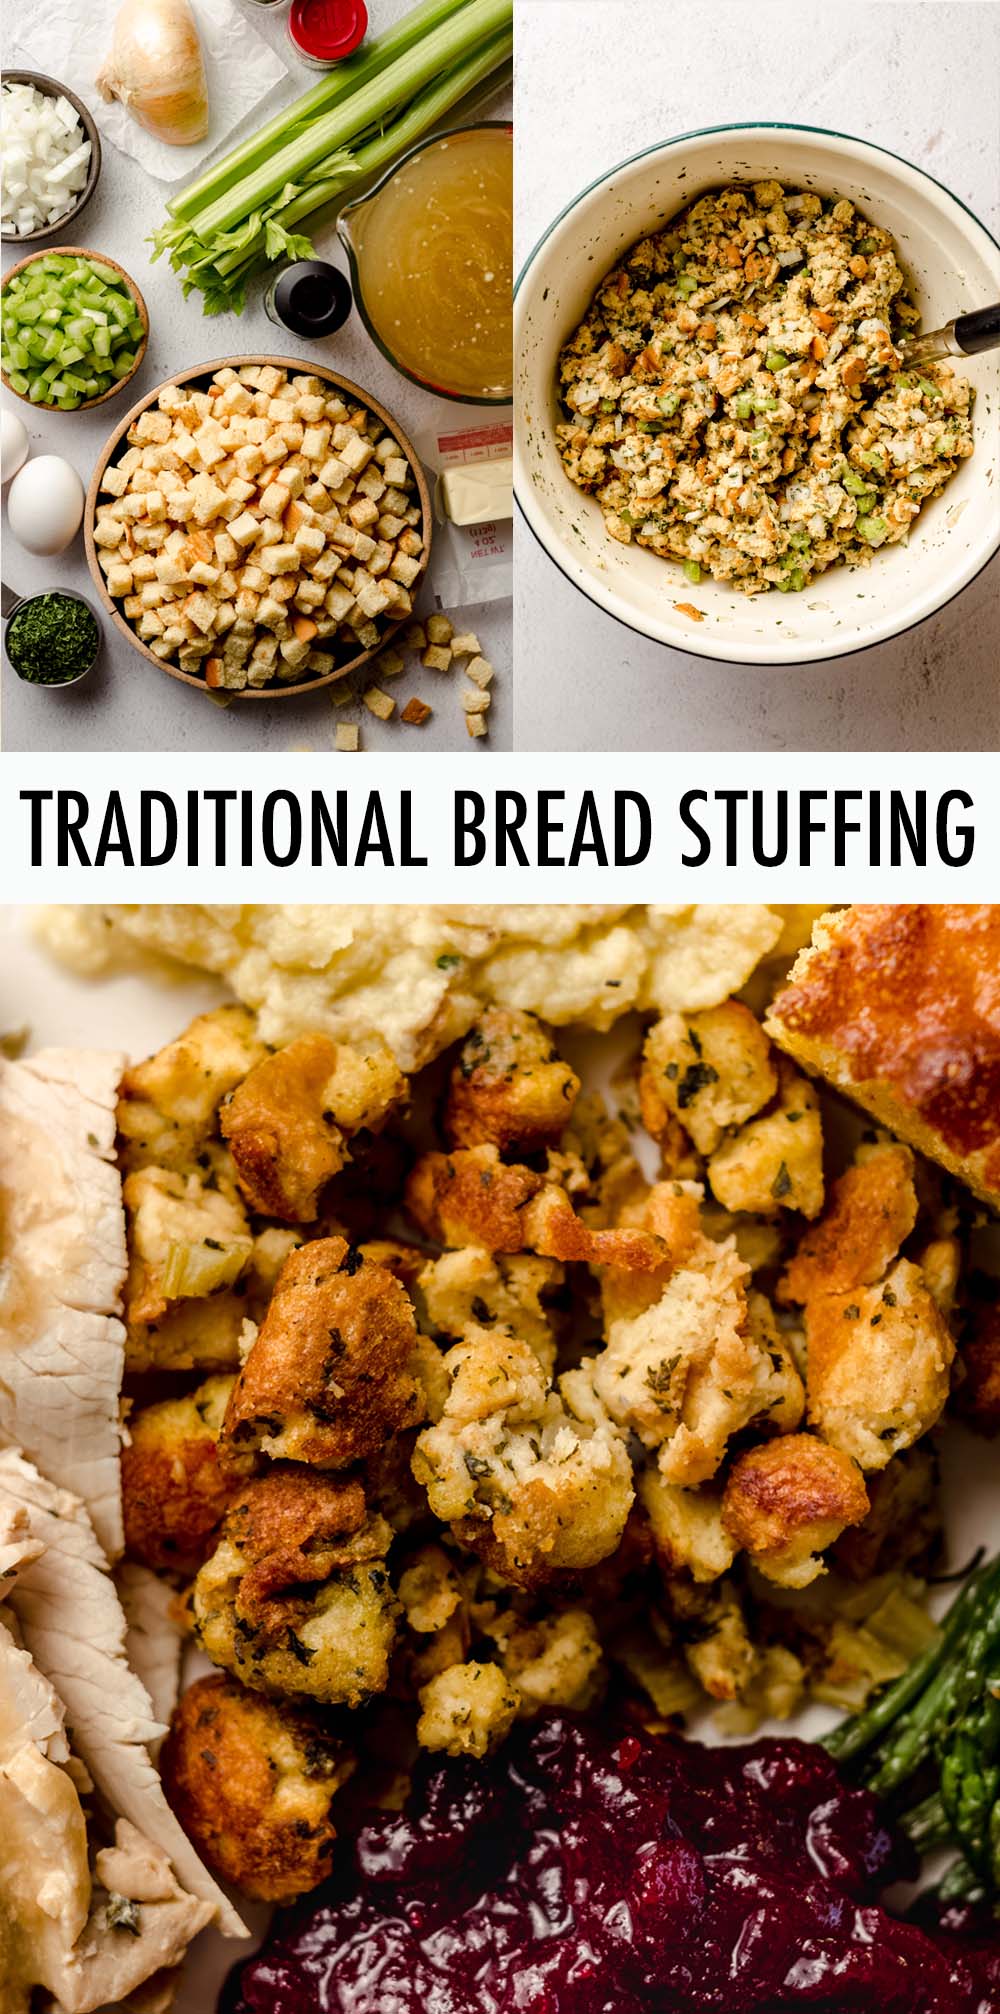 Loaded with flavorful vegetables and the perfect herbs to complement your dish, this classic bread stuffing will go great at your Thanksgiving feast or any meal you'd like to pair with an easy stuffing recipe. via @frshaprilflours